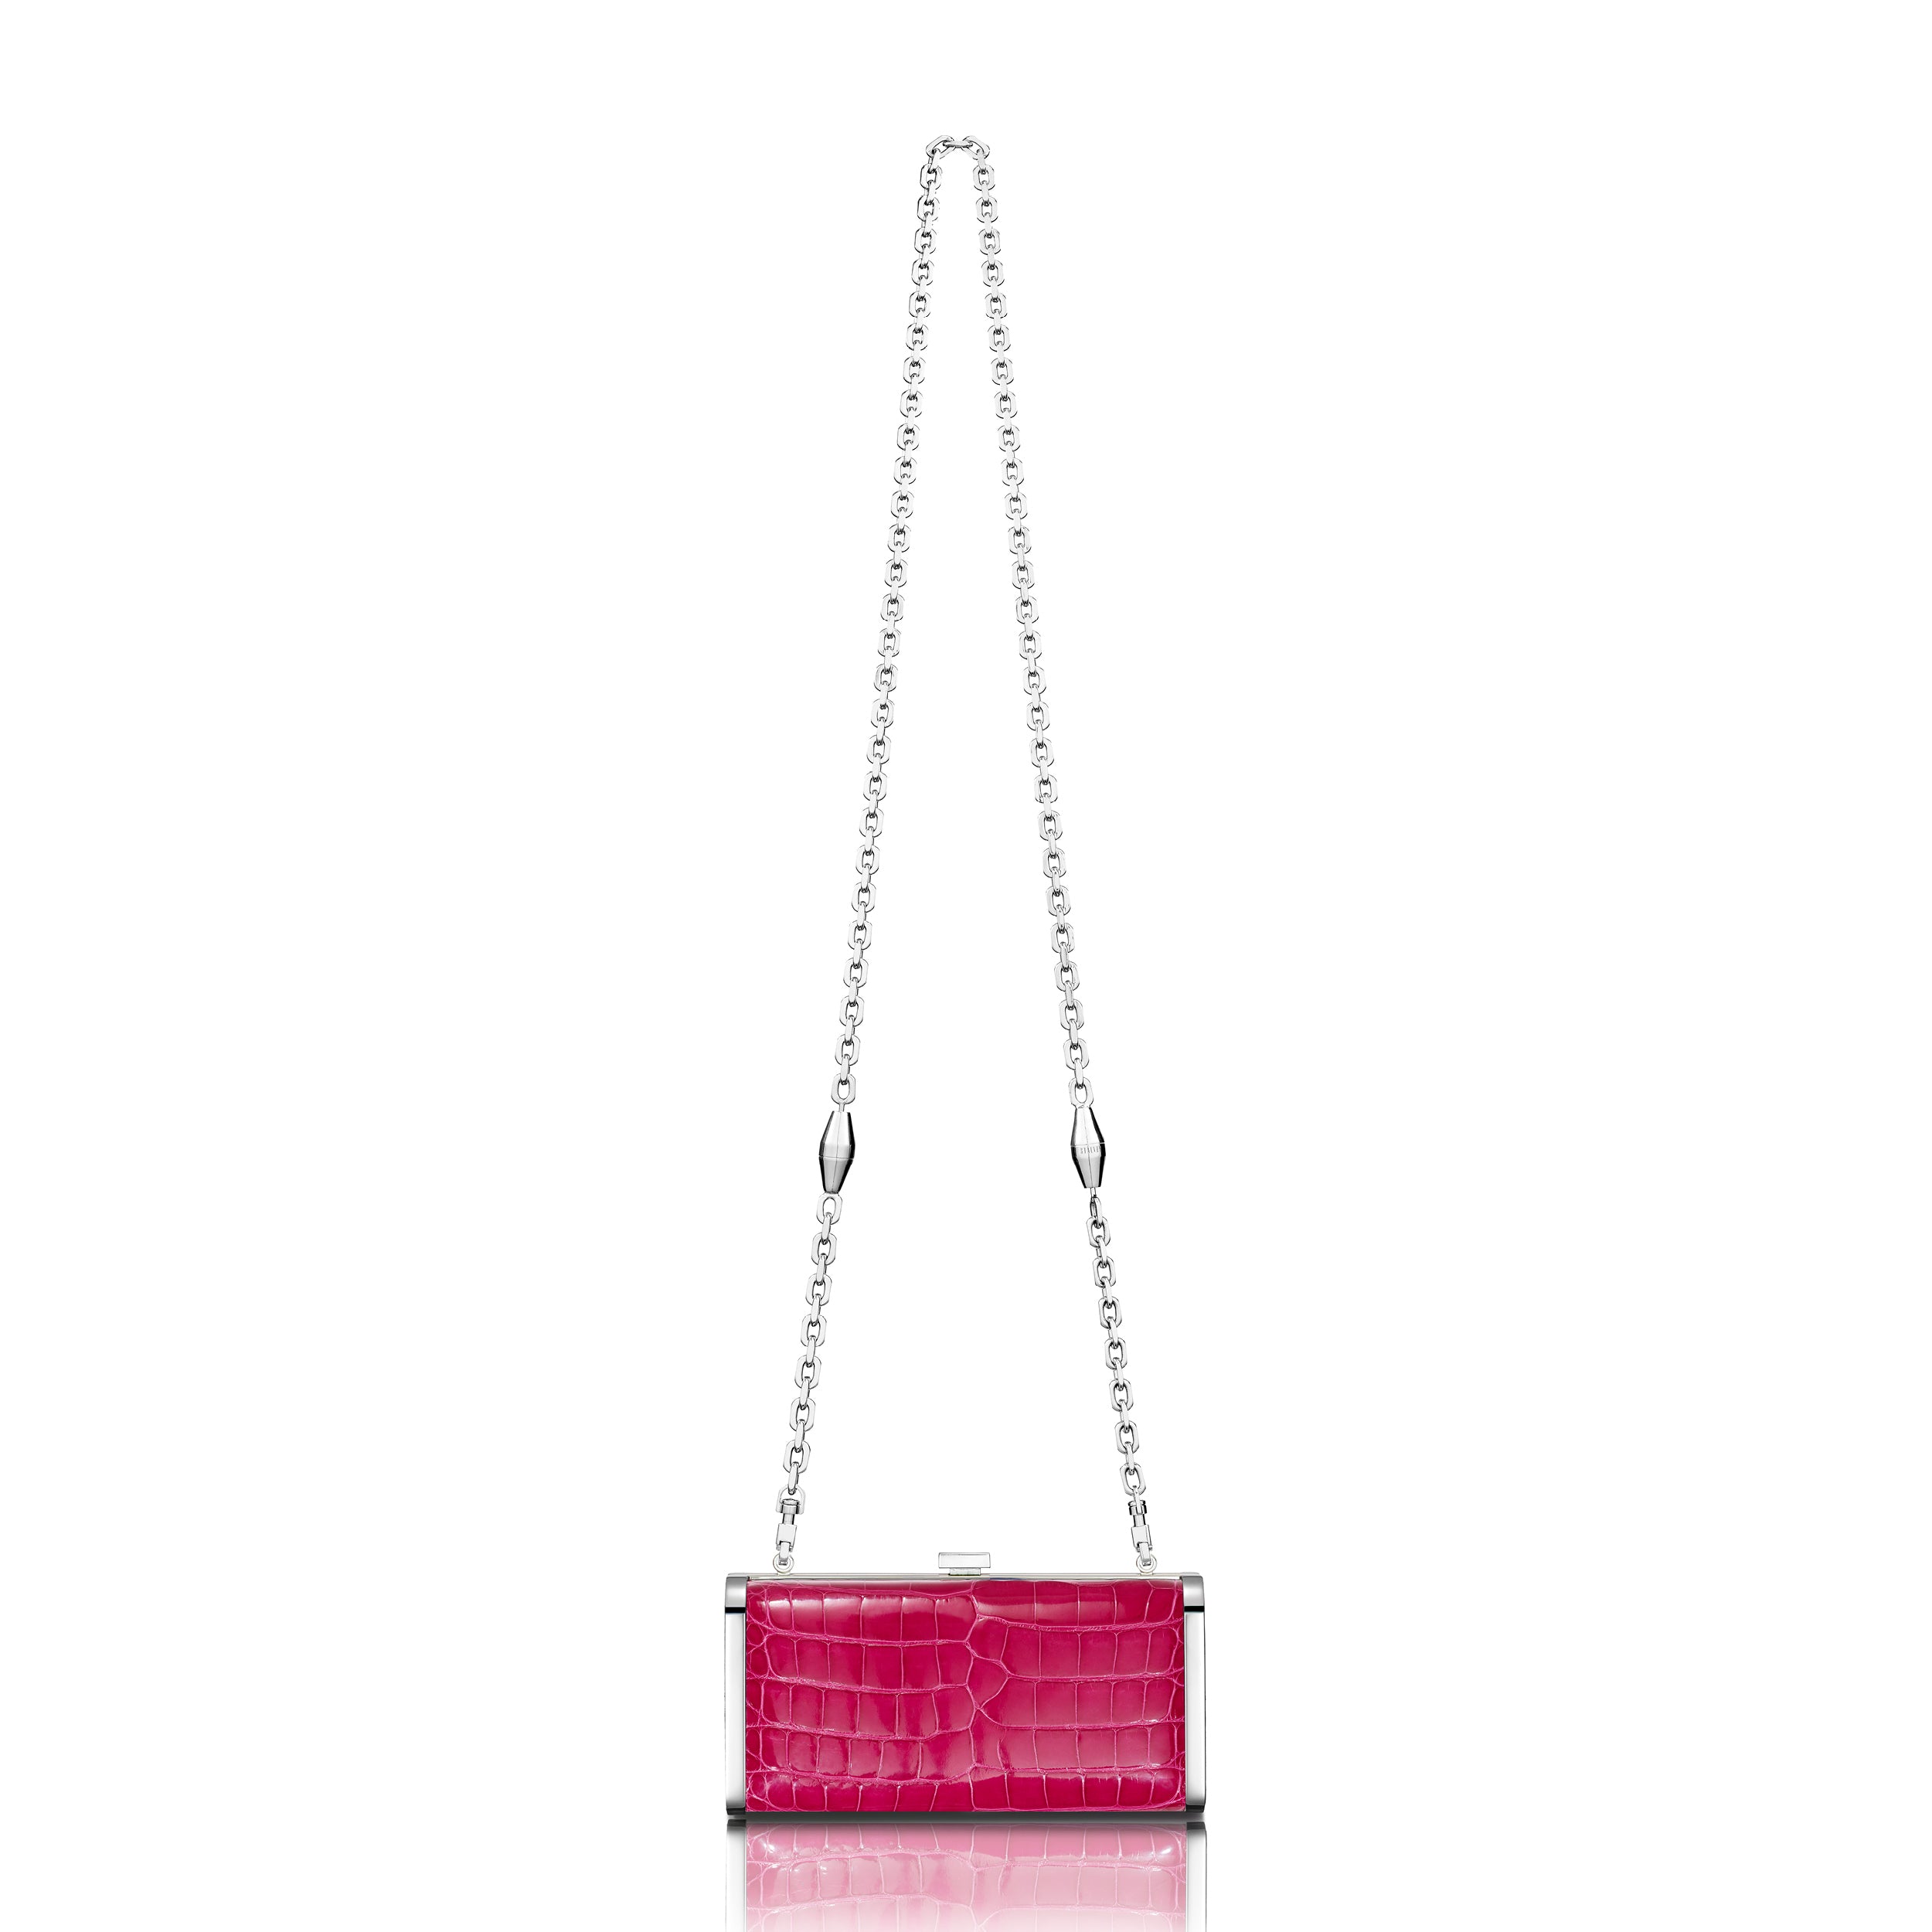 STALVEY Square Clutch in Punch Alligator with Palladium Hardware Front View with Chain